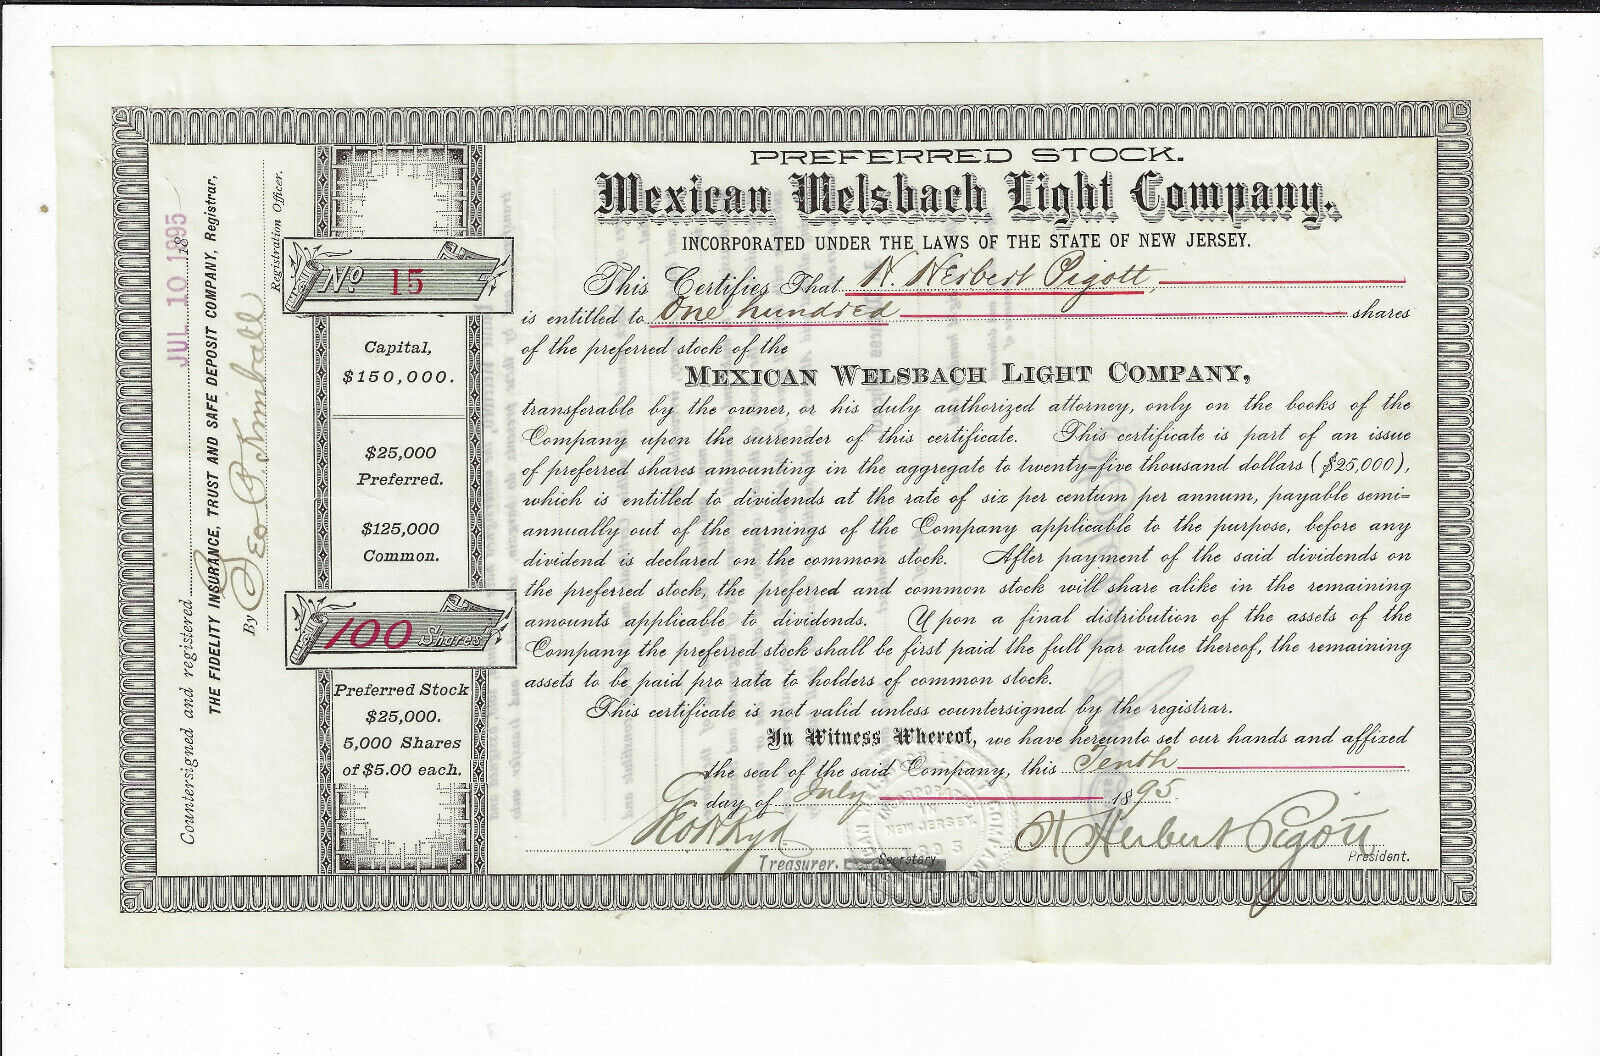 New Jersey 1895 Mexican Welsbach Light Company Stock Certificate #15